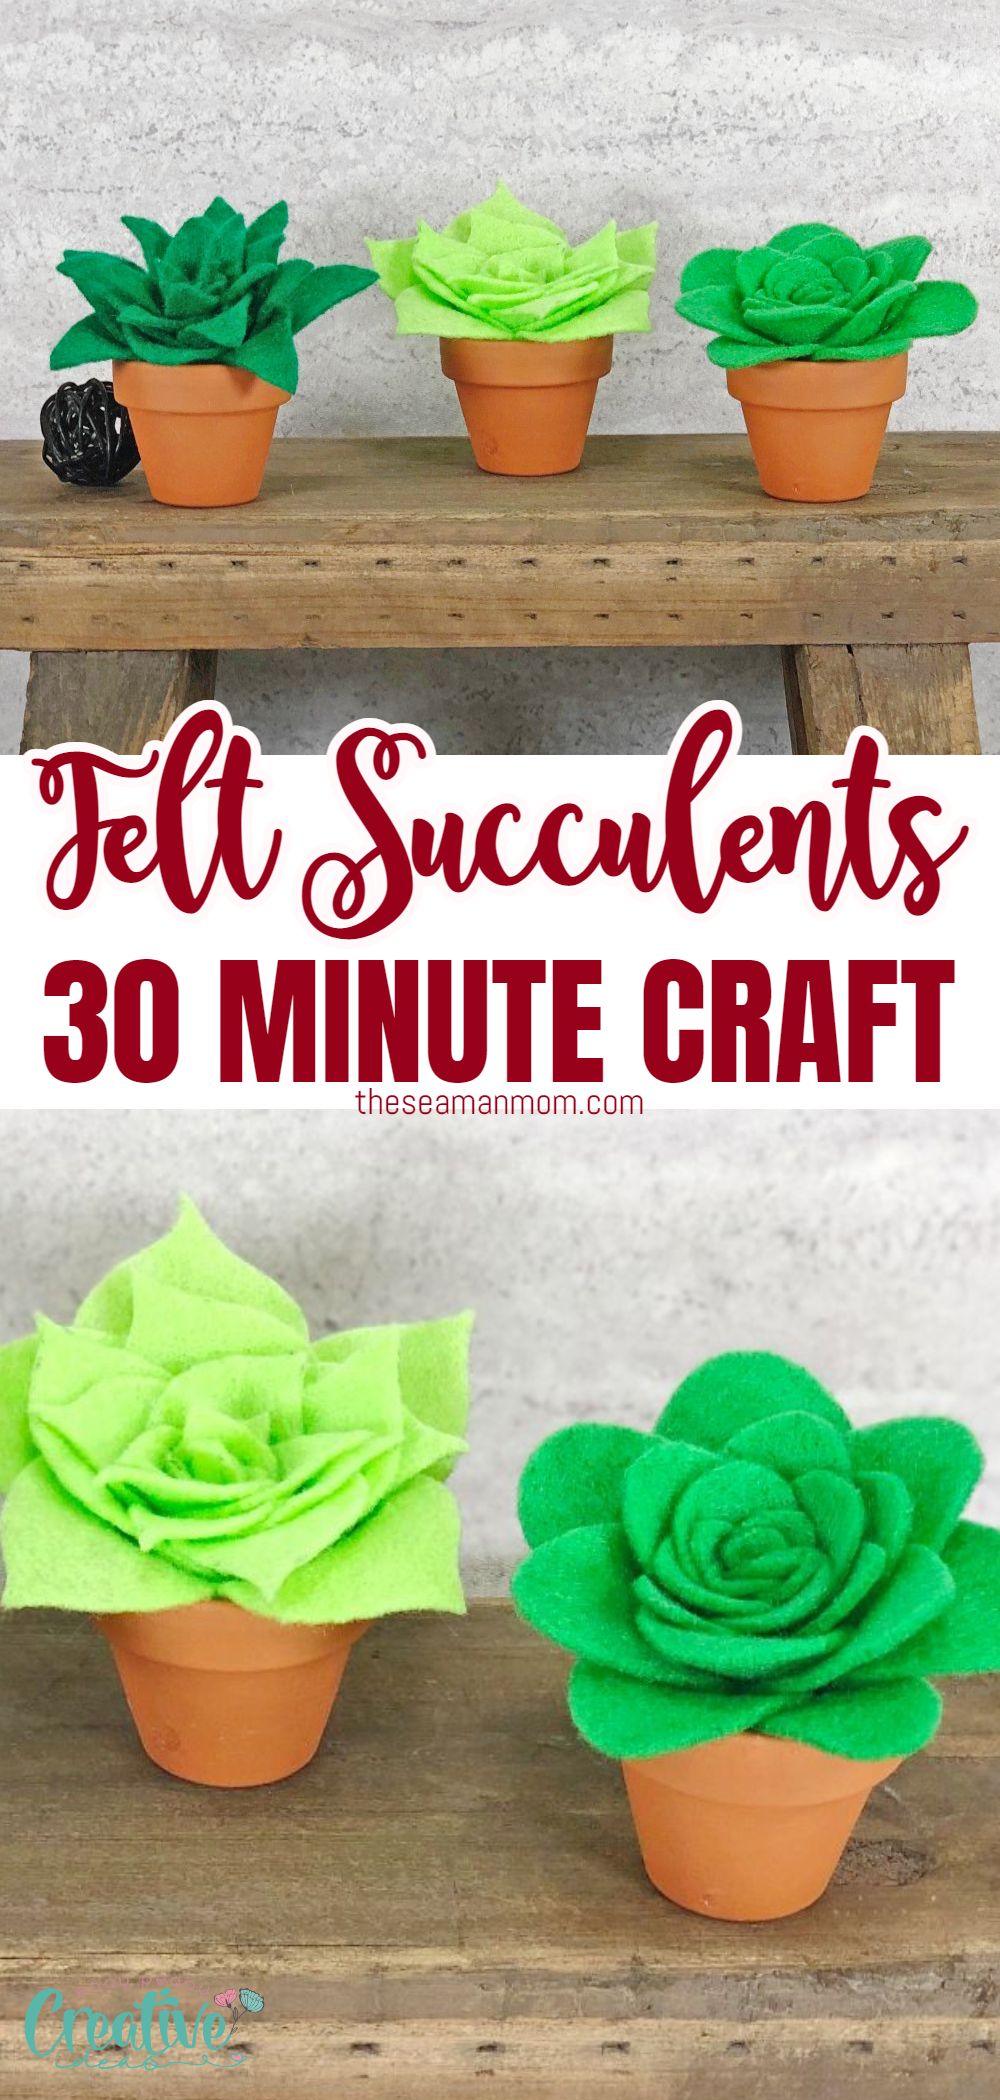 Make your own felt succulent plants for your home! These make great housewarming gifts, and you don't need to water them! Read through to see what supplies you'll need and how to make your own DIY succulent planters. Cute, inexpensive, and fun to make, this succulent craft is a great project for crafters of every skill level. via @petroneagu